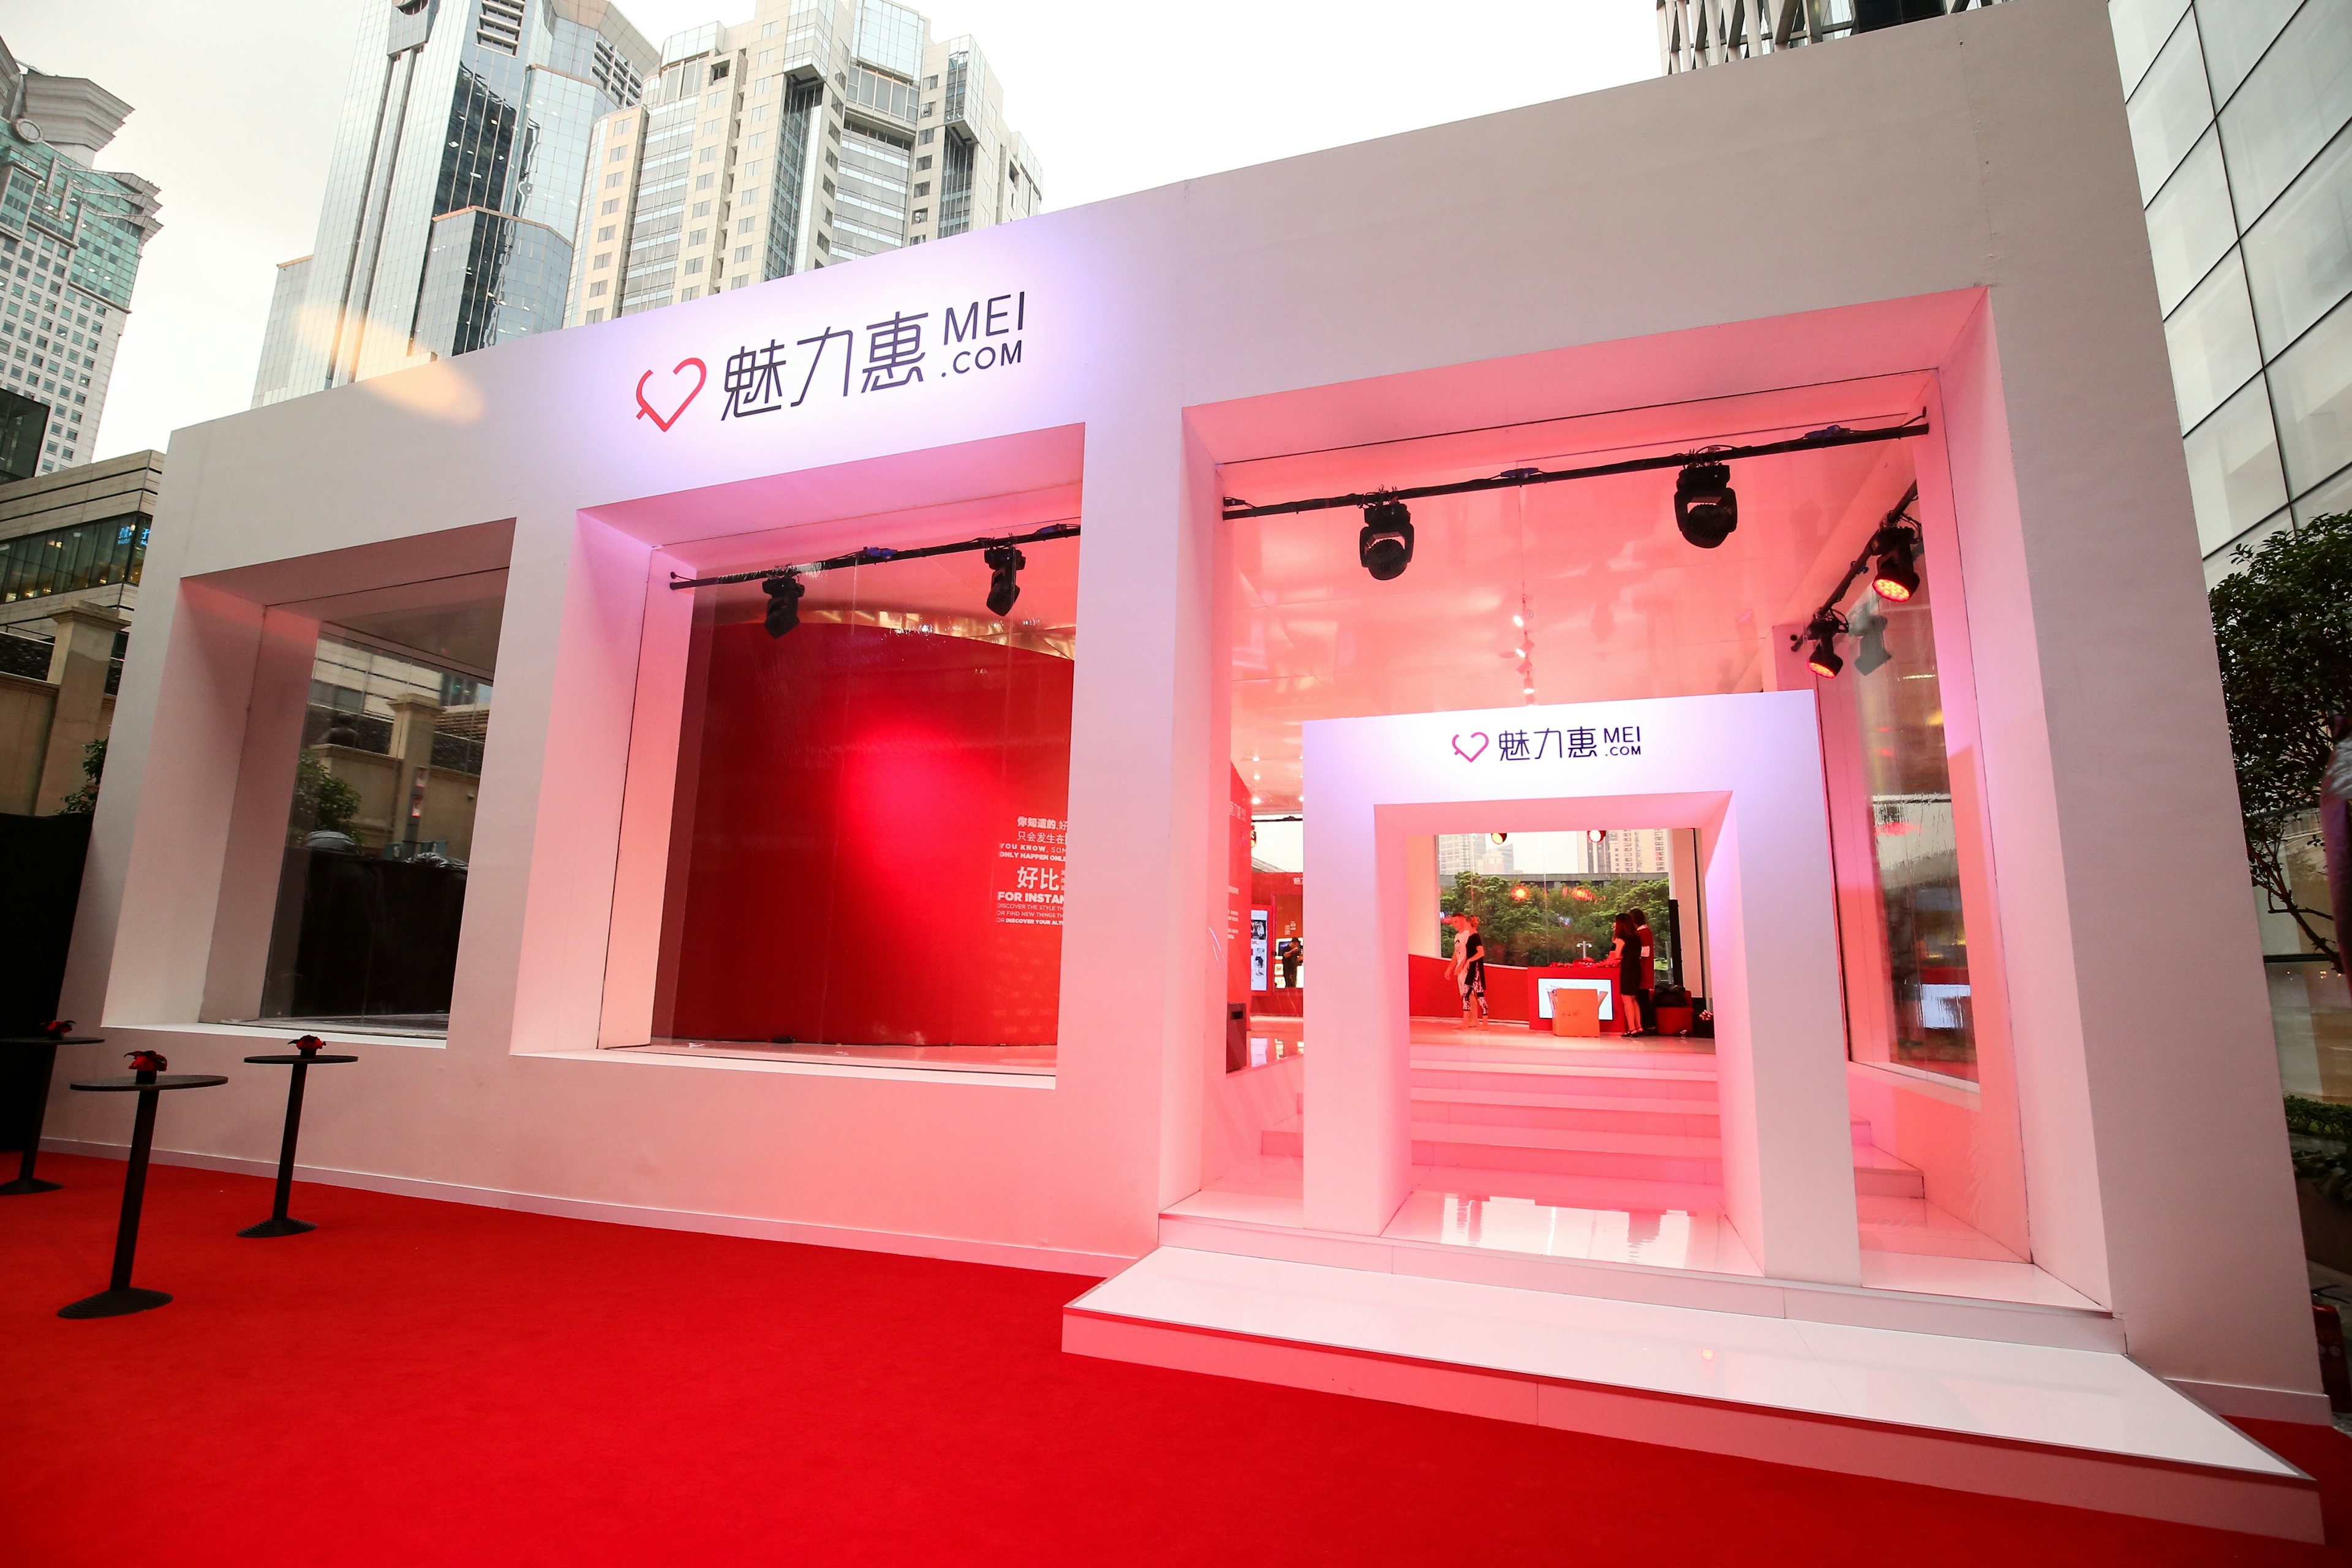 The exterior of Mei.com's virtual reality center for its 916 shopping festival. (Courtesy Photo)